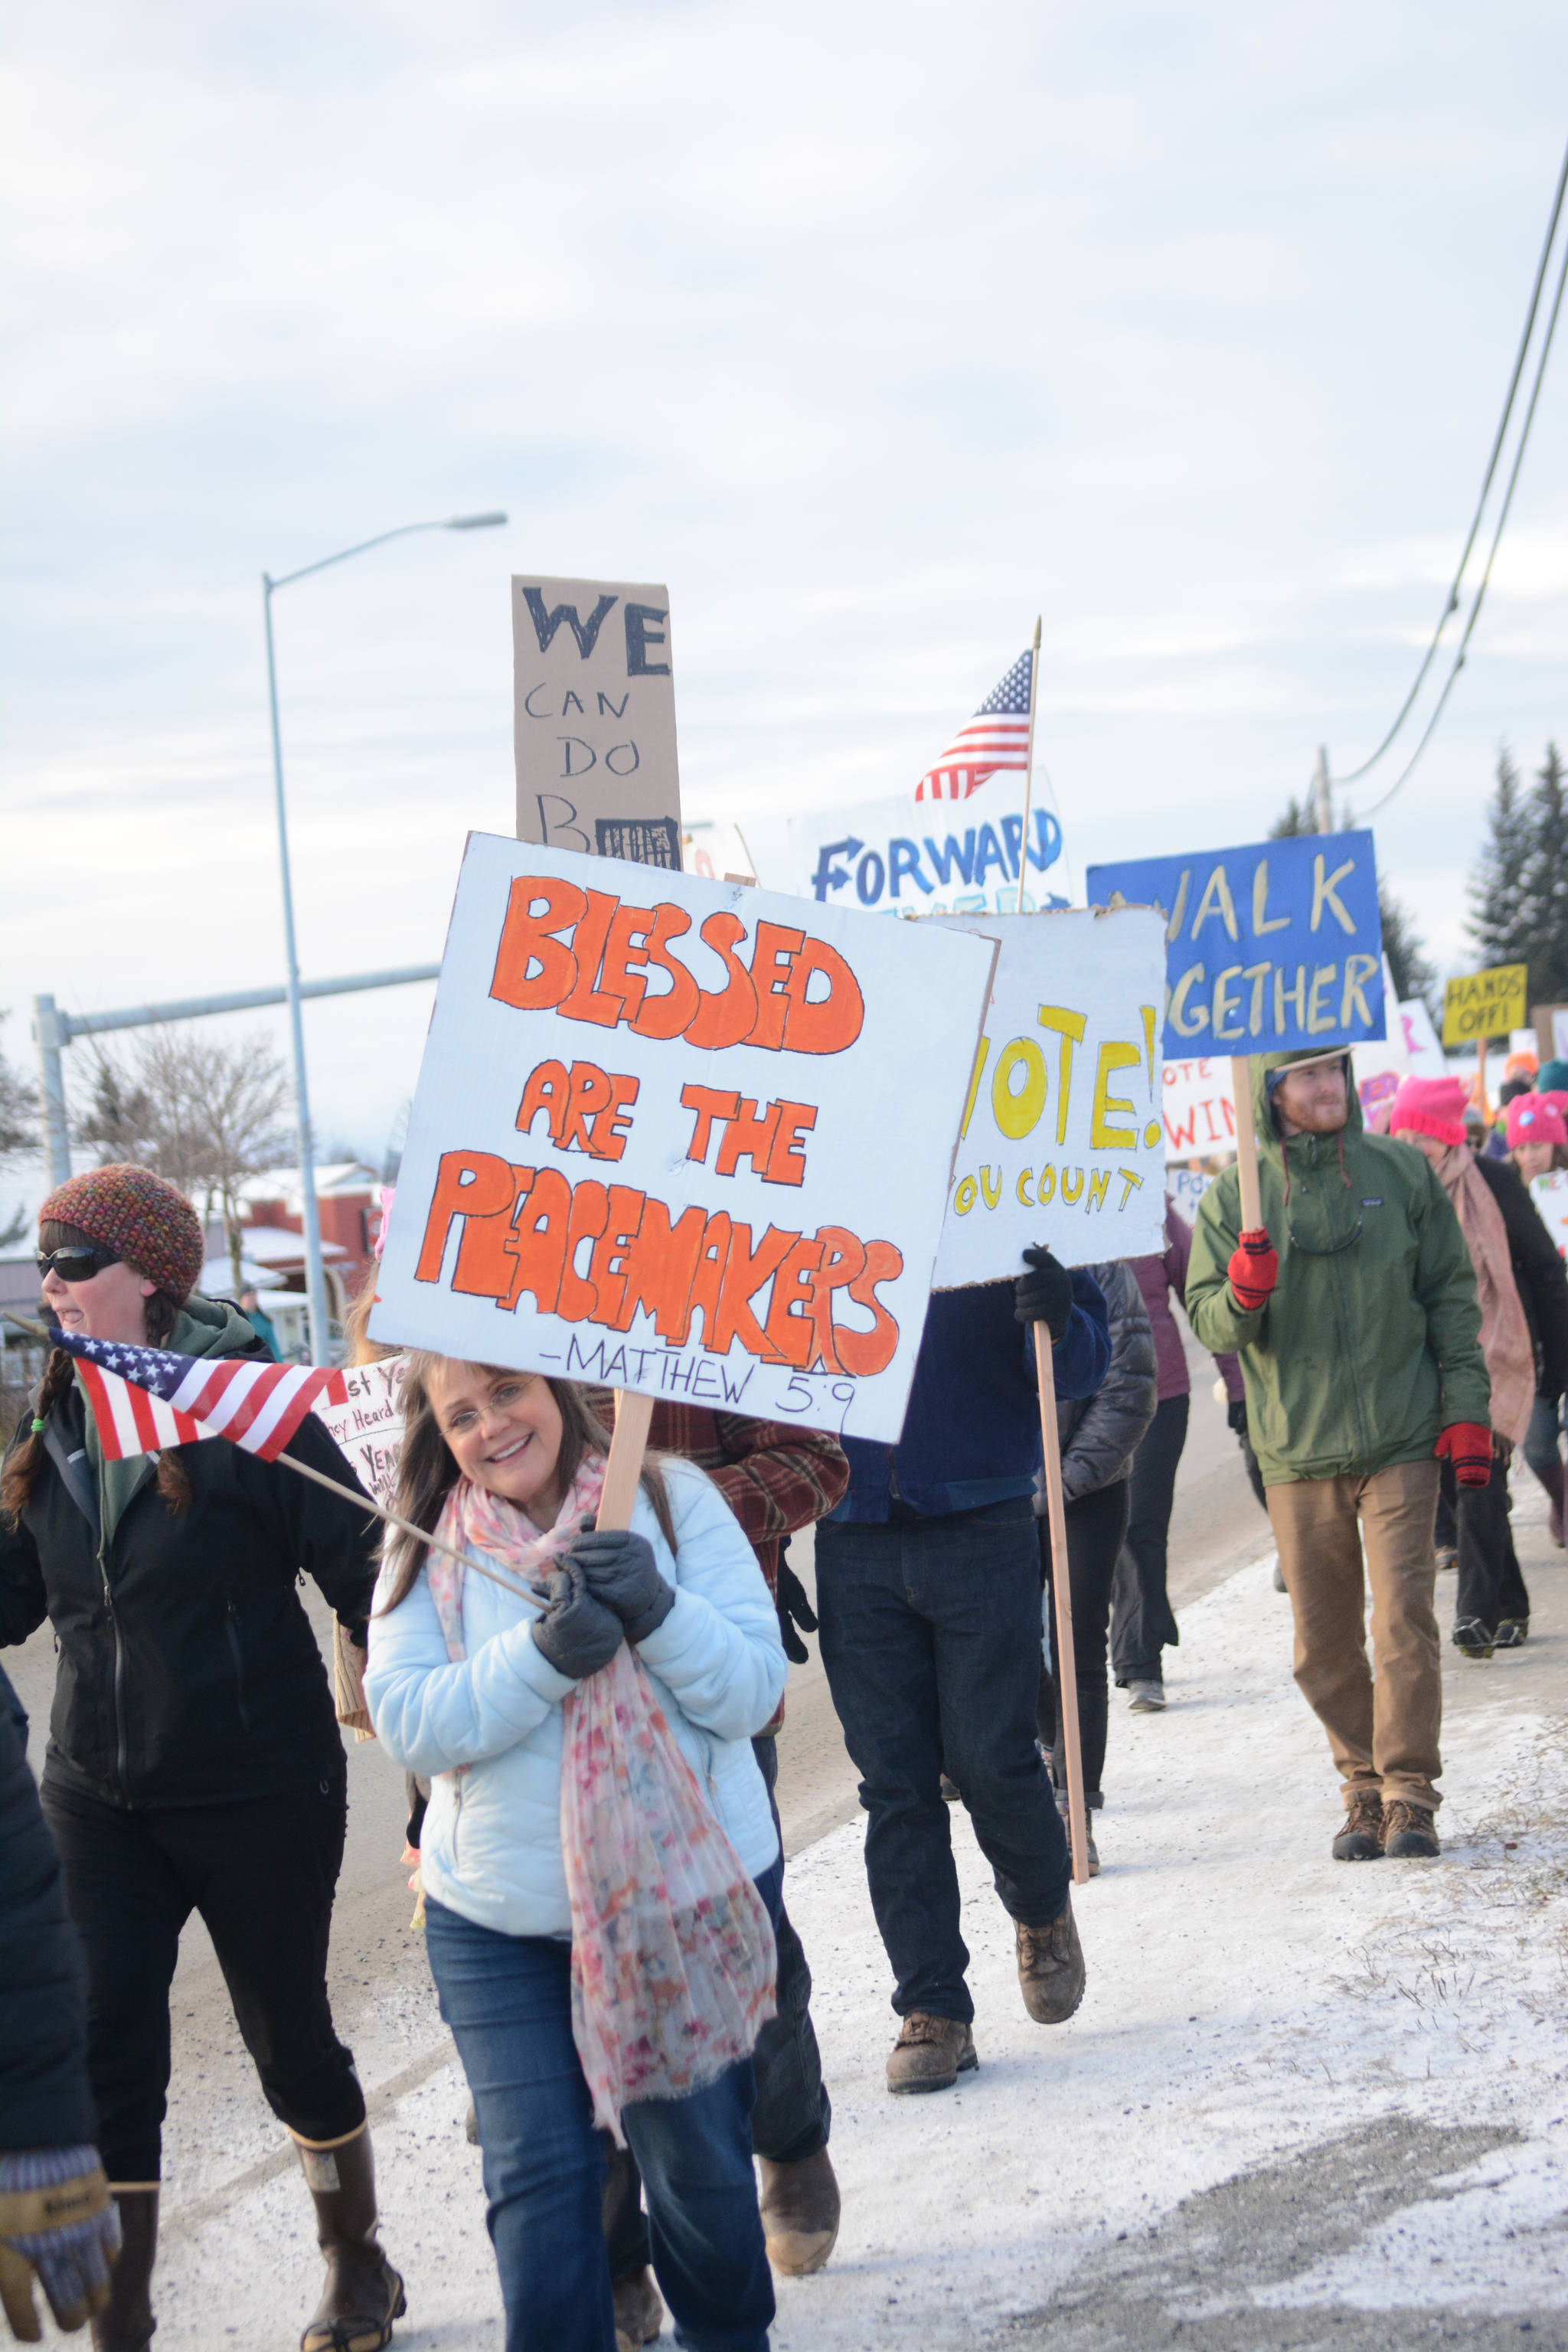 A line of protesters curves along Pioneer Avenue in the Homer March for Women on Saturday. About 700 people walked in the march along Pioneer Avenue on Jan. 20, 2018, in Homer, Alaska. The group of marchers extended from Main Street to Kachemak Way. (Photo by Michael Armstrong/Homer News)